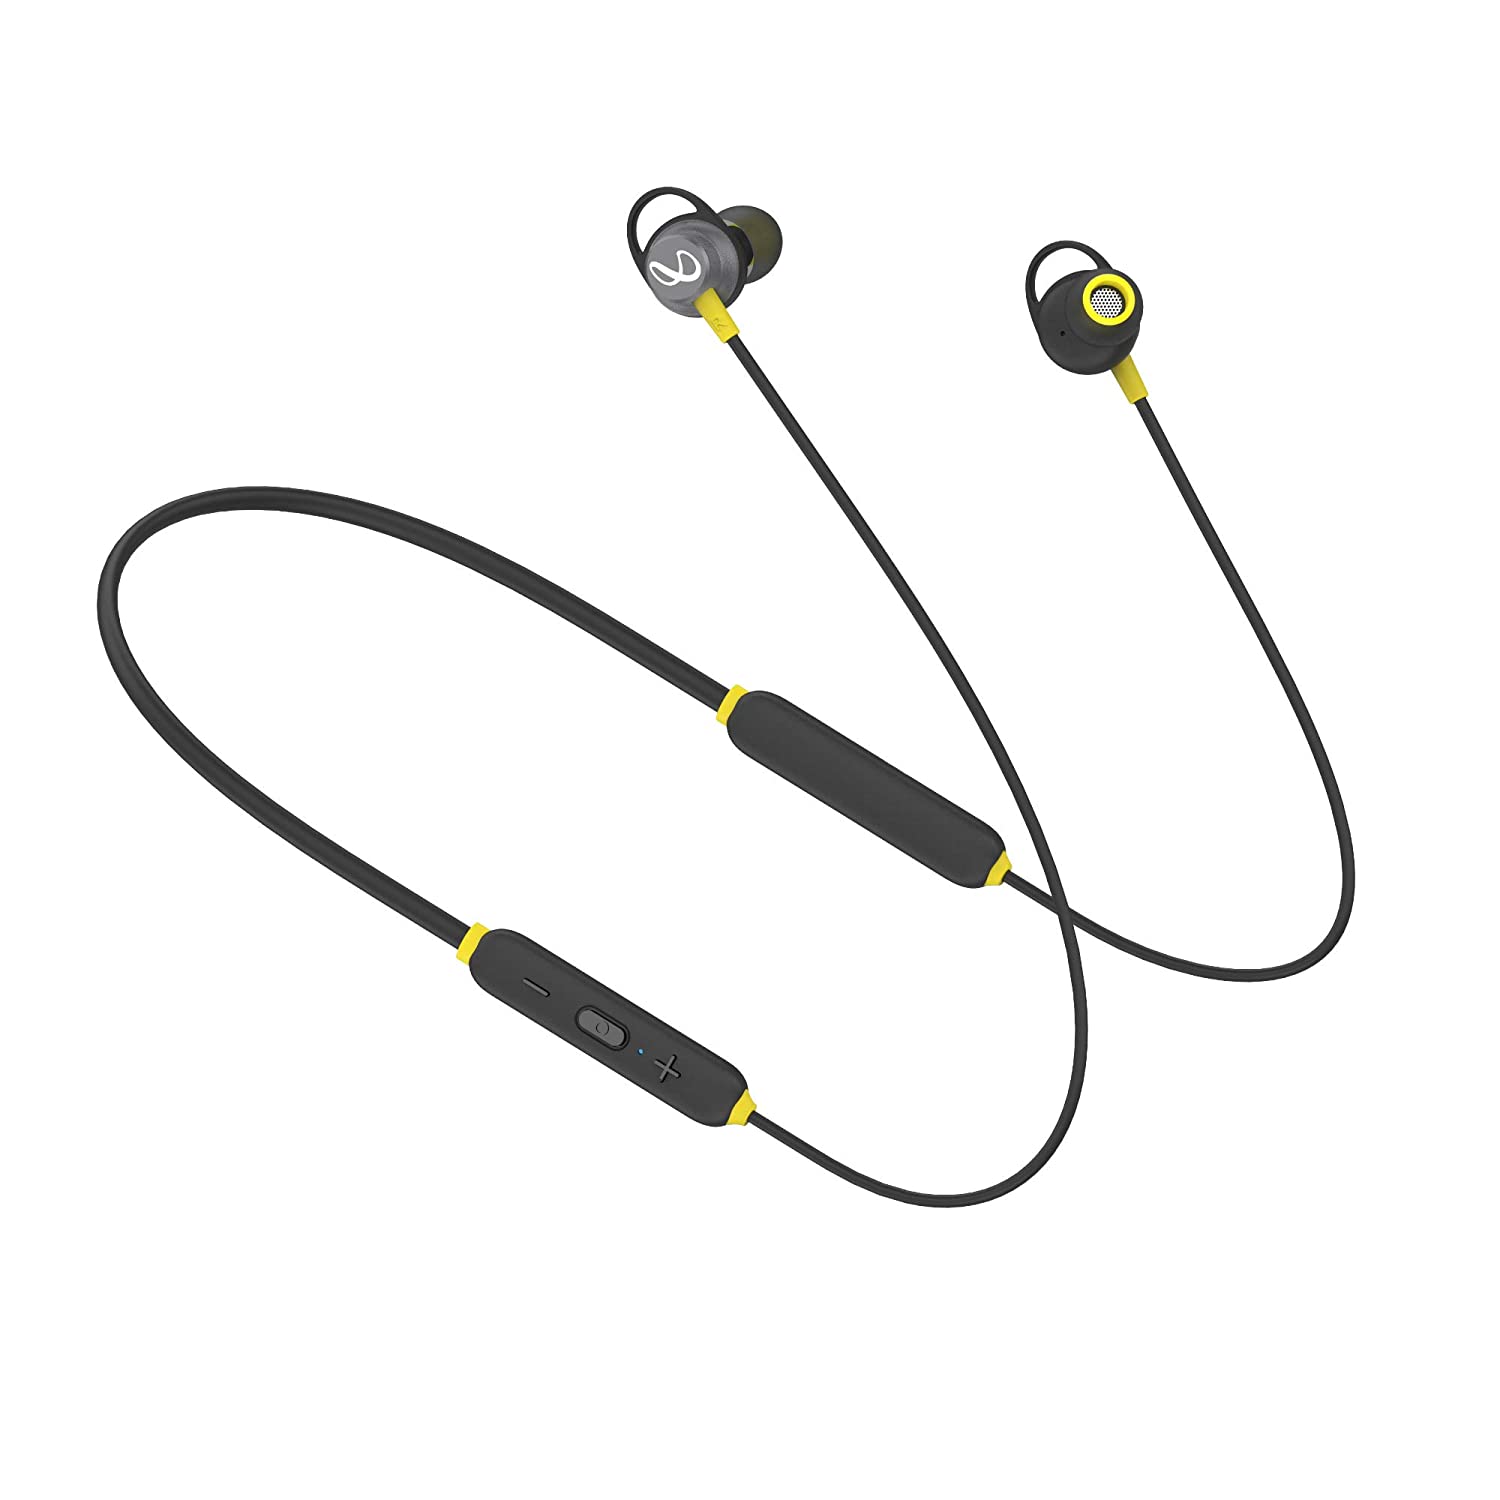 Infinity (JBL) Glide 120 Metal in-Ear Wireless Earphones, with Bluetooth 5.0 and IPX5 Sweatproof (Black and Yellow)